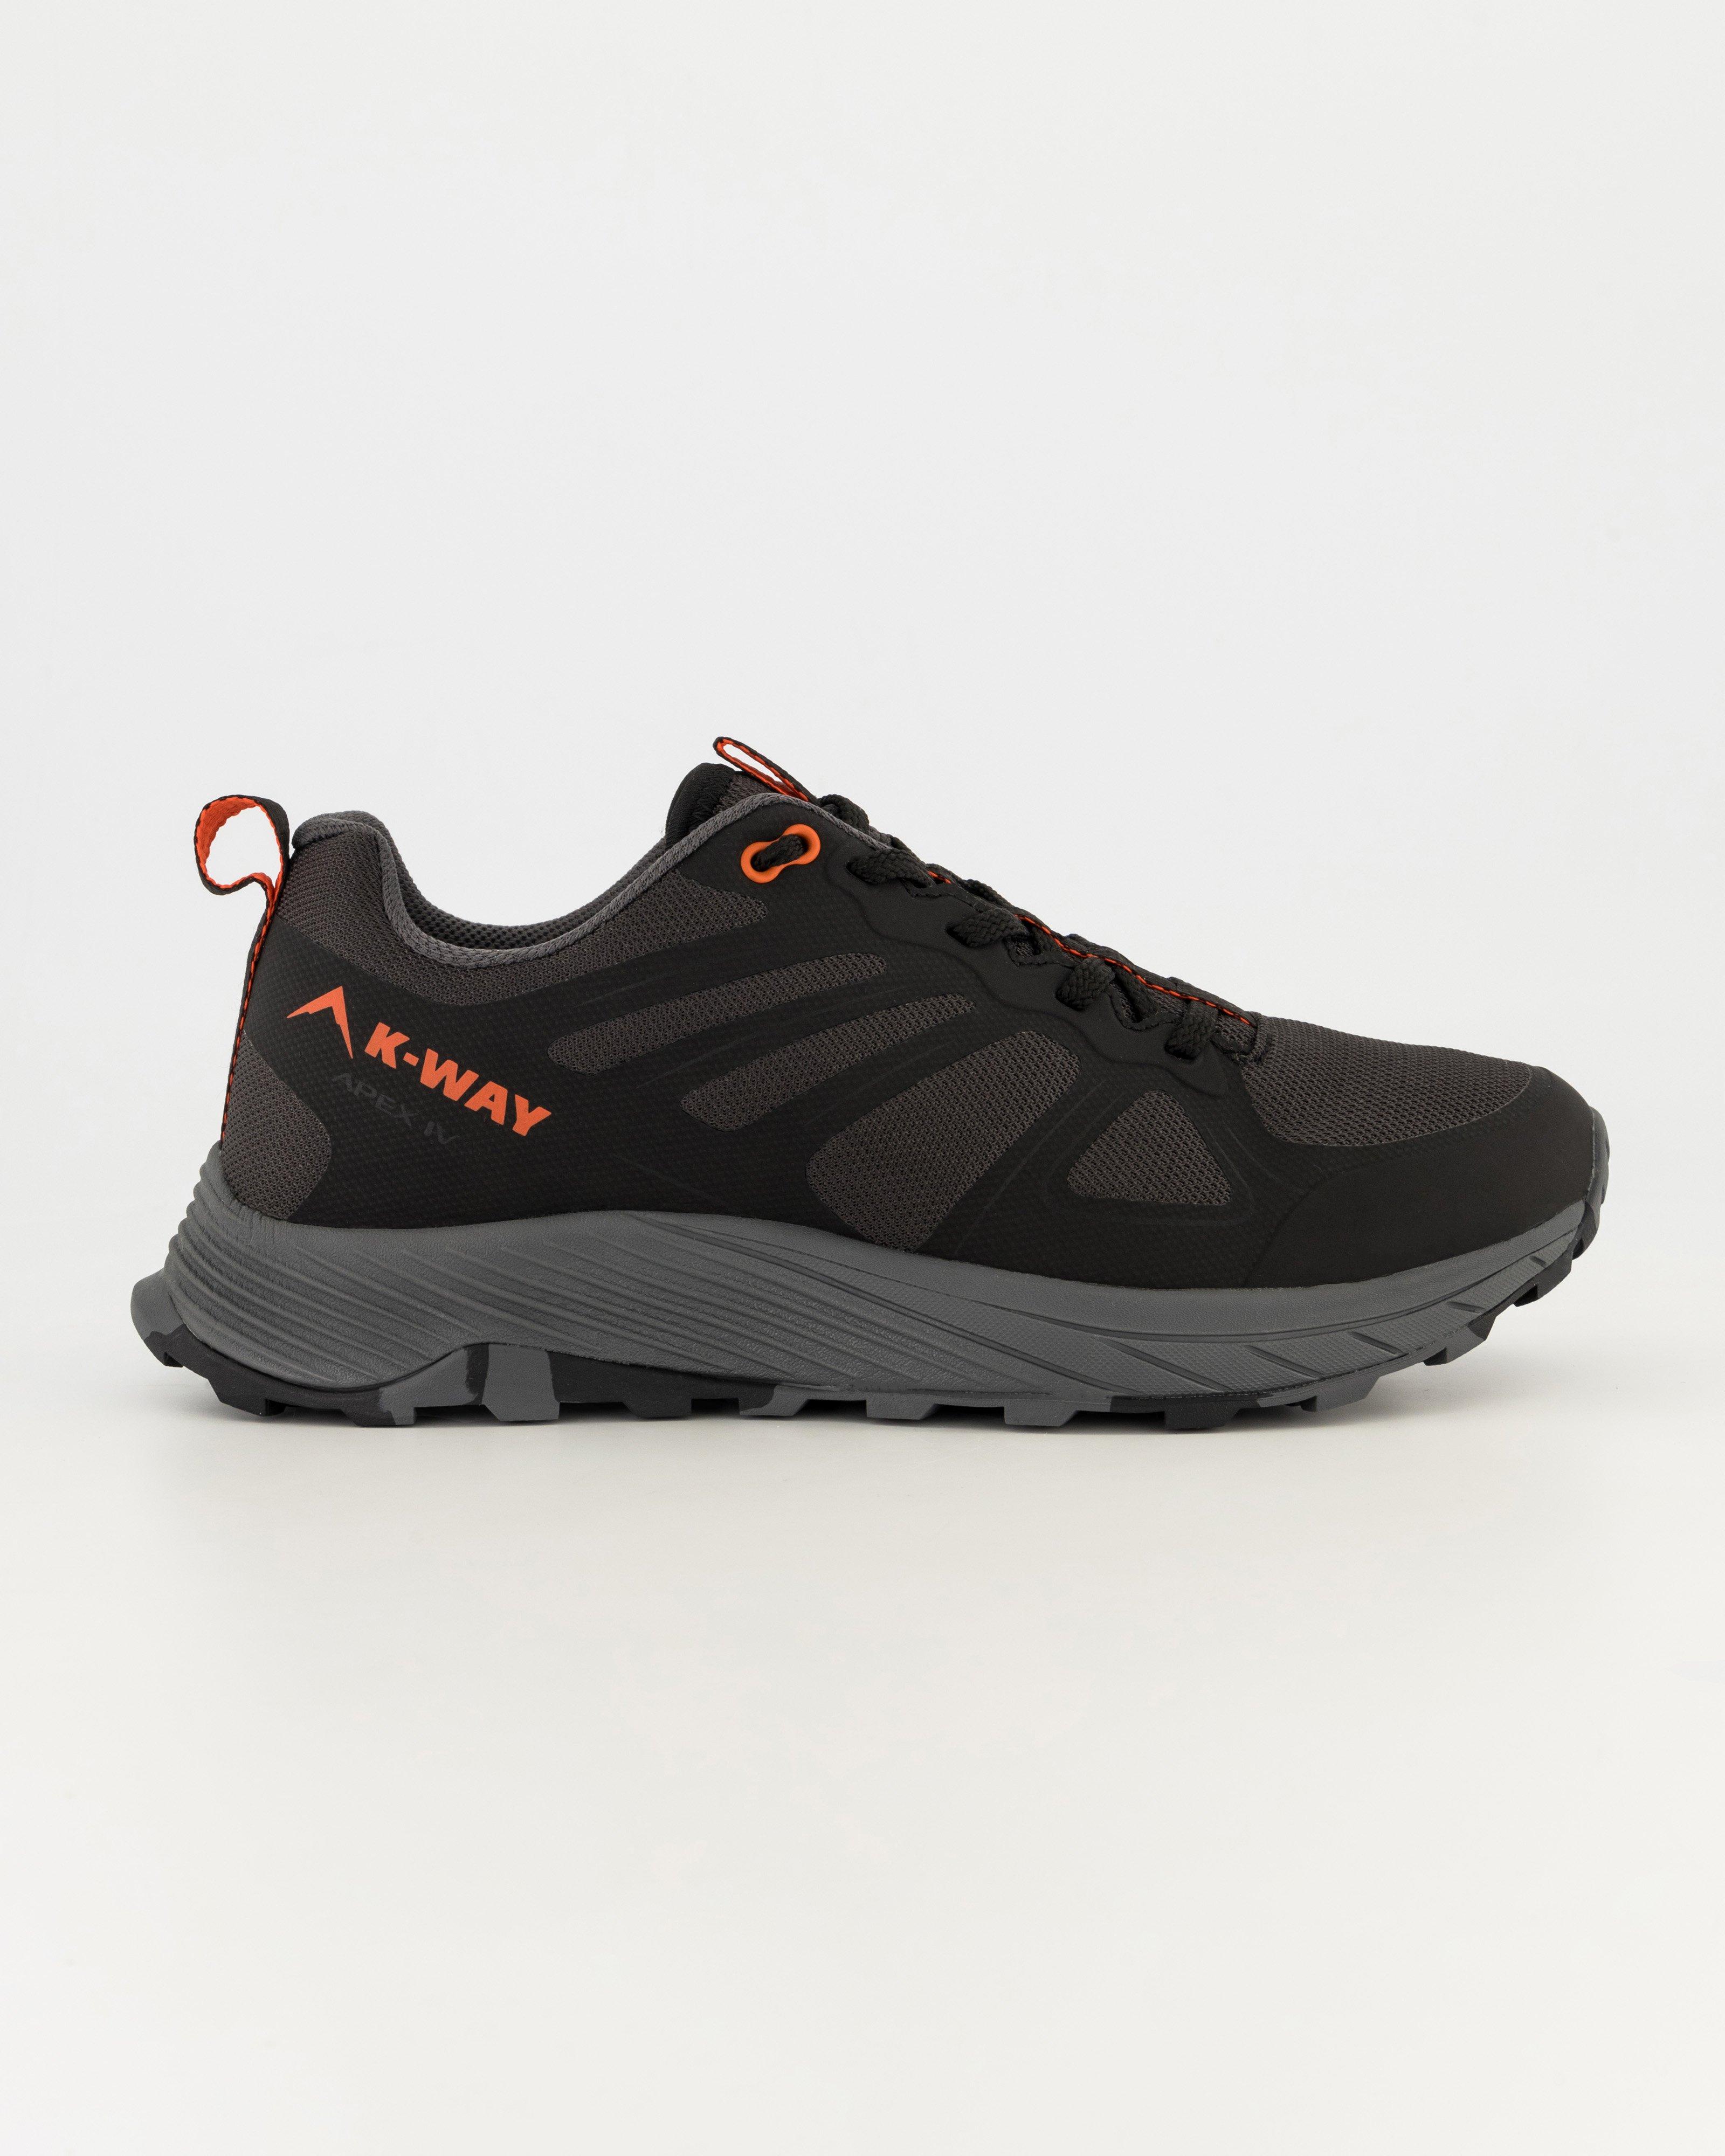 K-Way Men’s Apex 4 Trail Running Shoes -  Charcoal